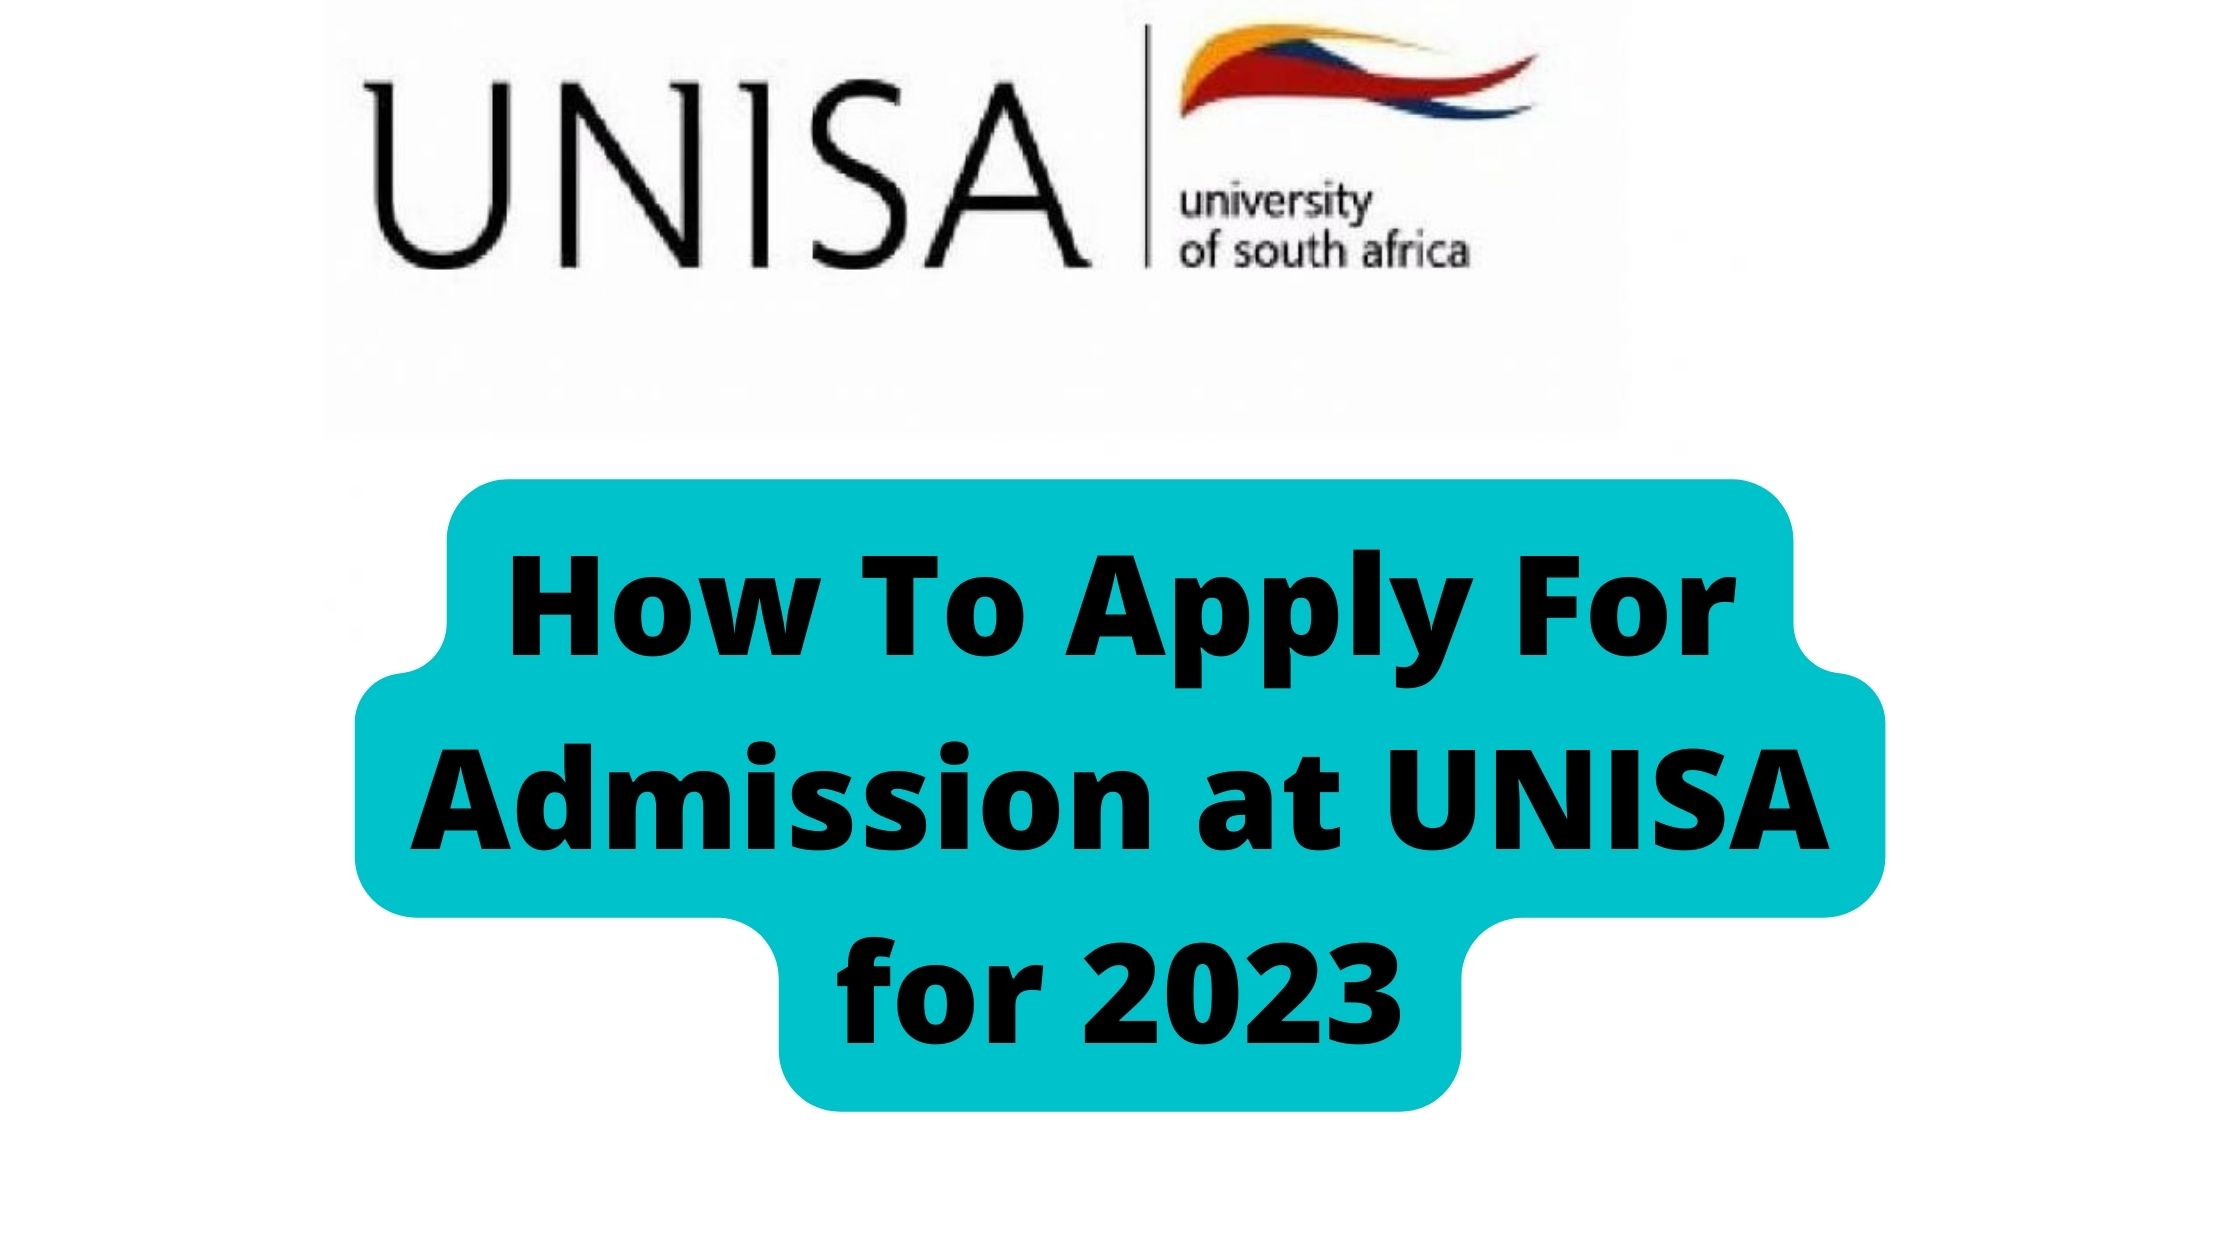 How To Apply For Admission at UNISA for 2023